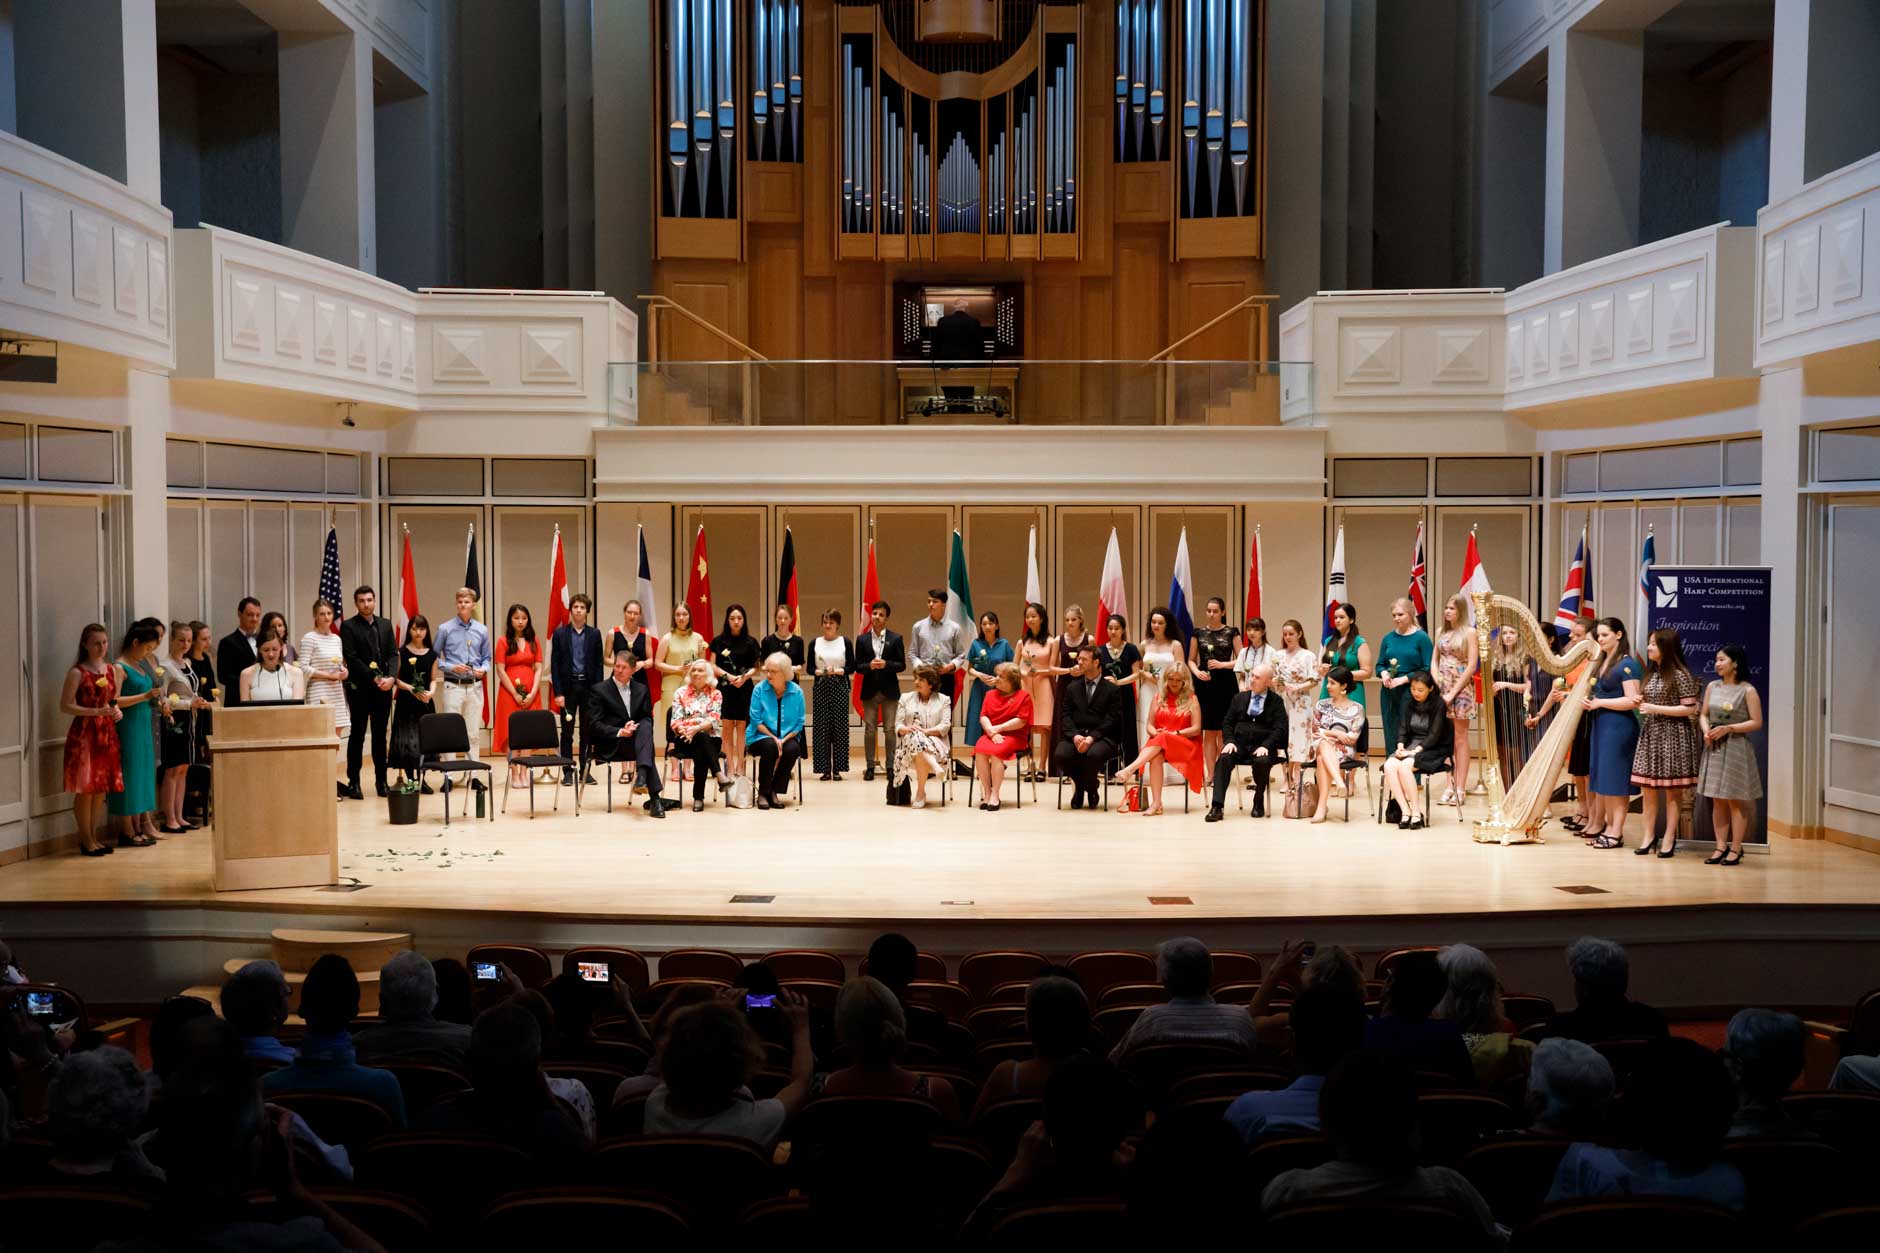 Contestants, special guests and jury members are pictured on stage during the opening ceremony of the 11th USA International Harp Competition at Indiana University in Bloomington, Indiana on Wednesday, July 3, 2019. (Photo by James Brosher)